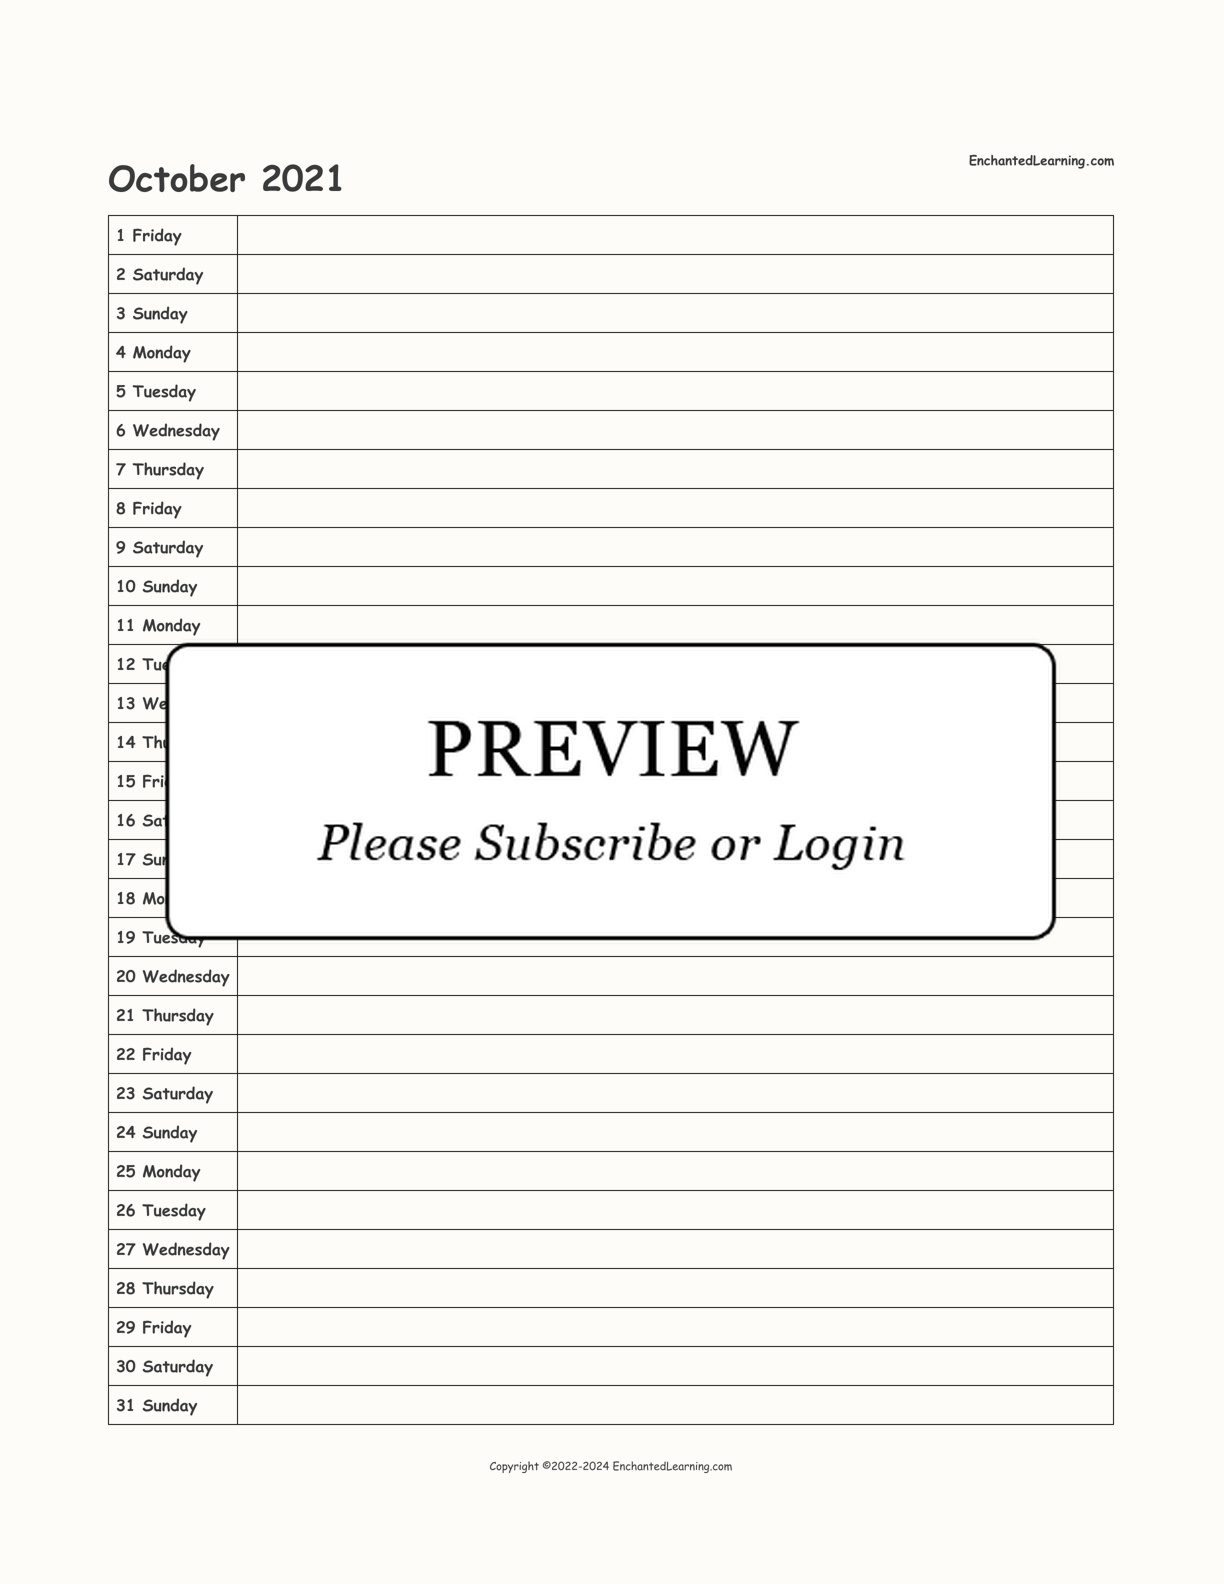 2021 Scheduling Calendar interactive printout page 10